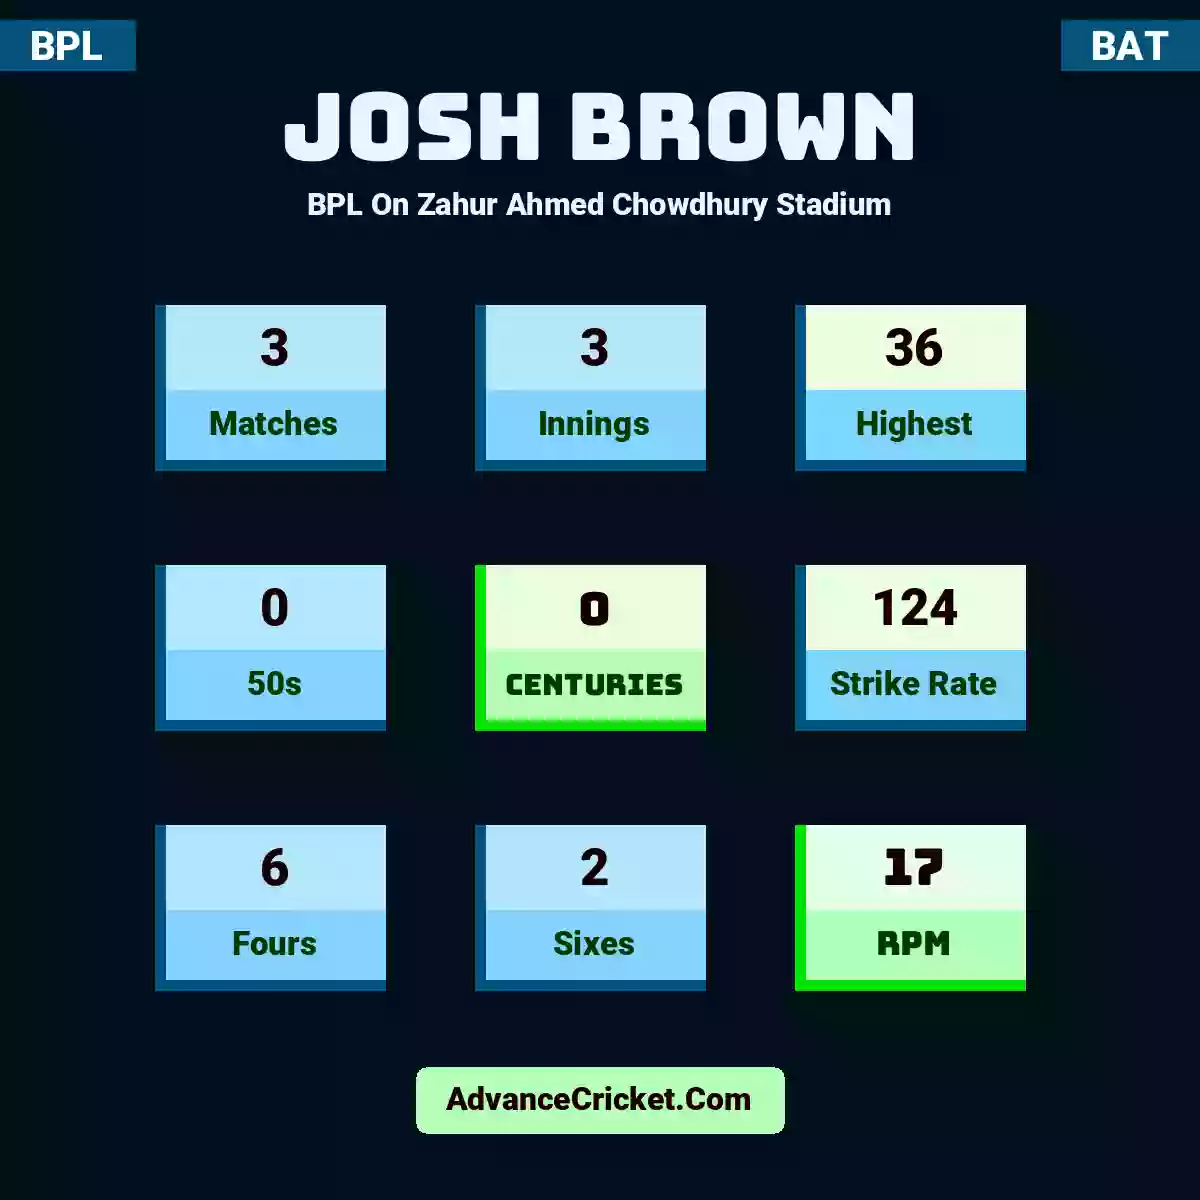 Josh Brown BPL  On Zahur Ahmed Chowdhury Stadium, Josh Brown played 3 matches, scored 36 runs as highest, 0 half-centuries, and 0 centuries, with a strike rate of 124. J.Brown hit 6 fours and 2 sixes, with an RPM of 17.